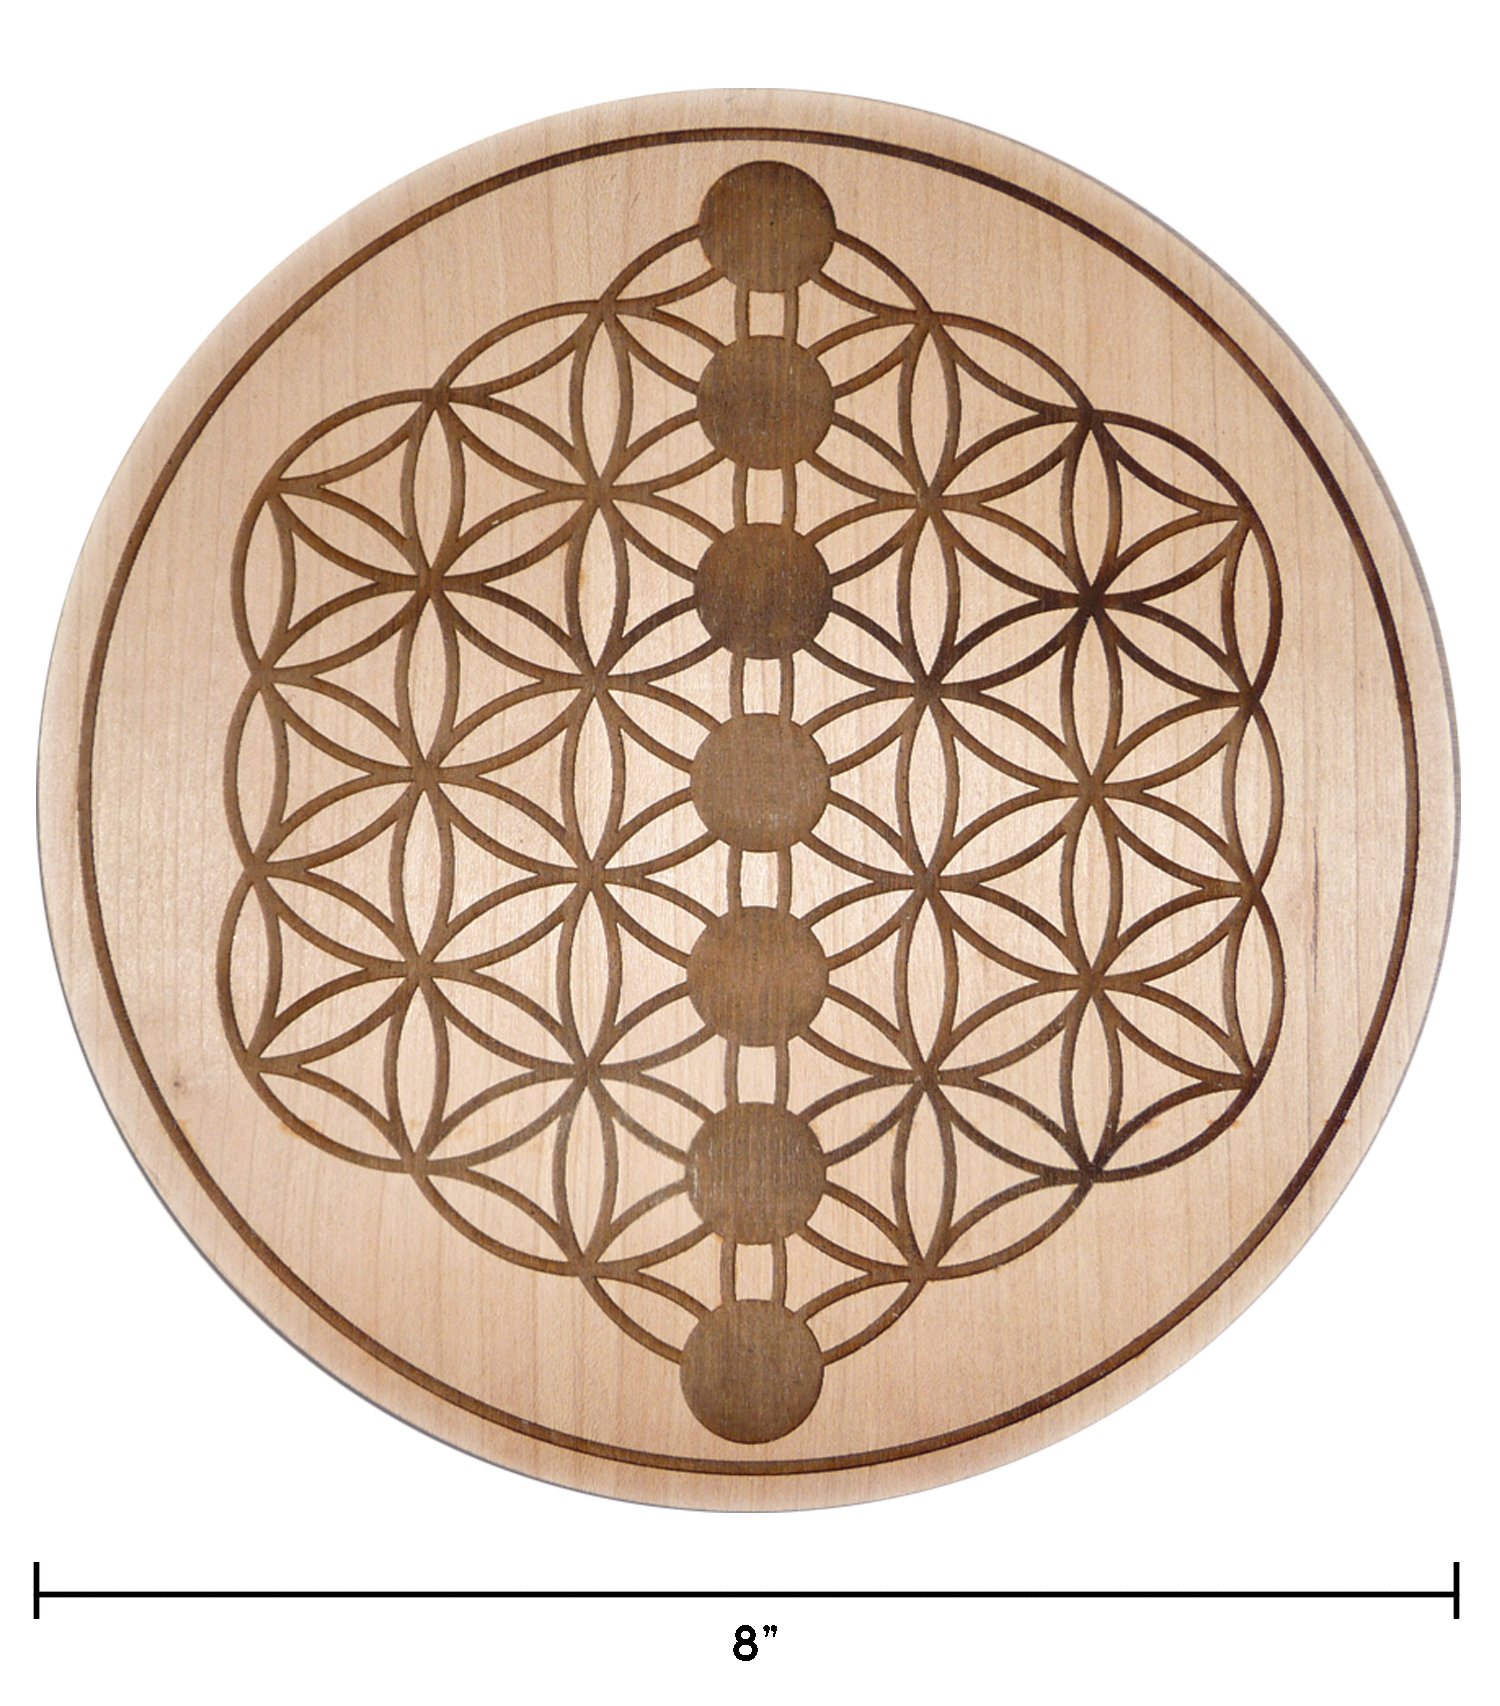 Image of NEW 8" CHERRY WOOD CHAKRA CRYSTAL GRID CHARGING BOARD